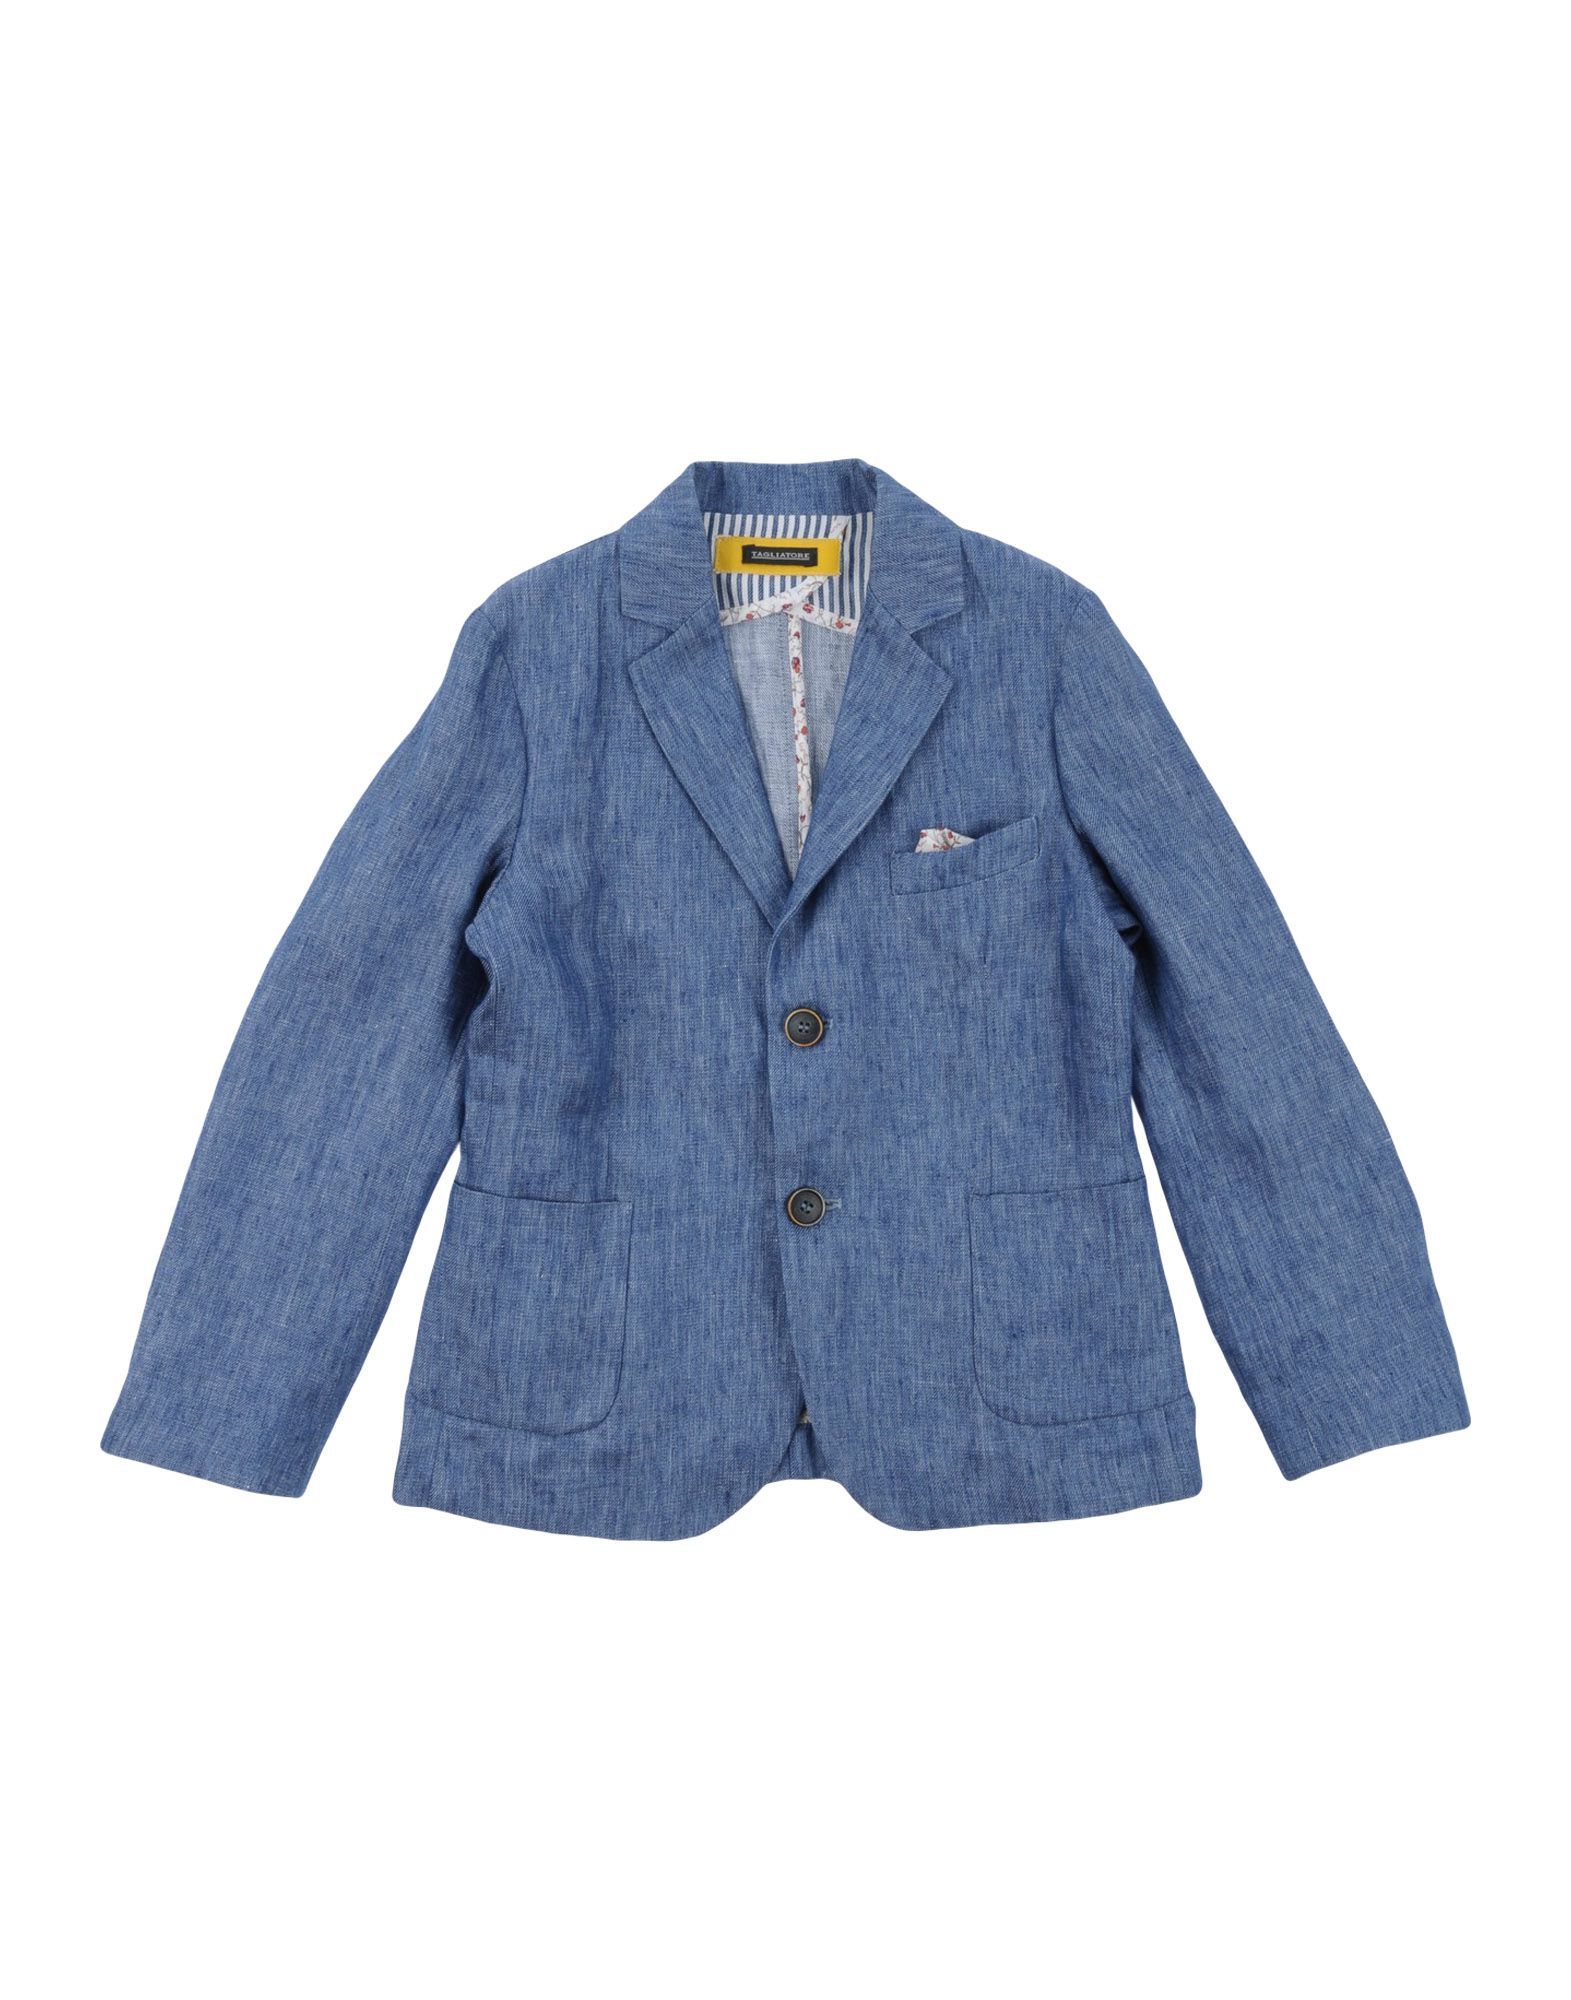 denim, no appliqu�s, solid colour, lapel collar, single-breasted , 2 buttons, single chest pocket, multipockets, long sleeves, dual back vents, wash at 30� c, dry cleanable, do not bleach, iron at 110� c max, tumble dryable